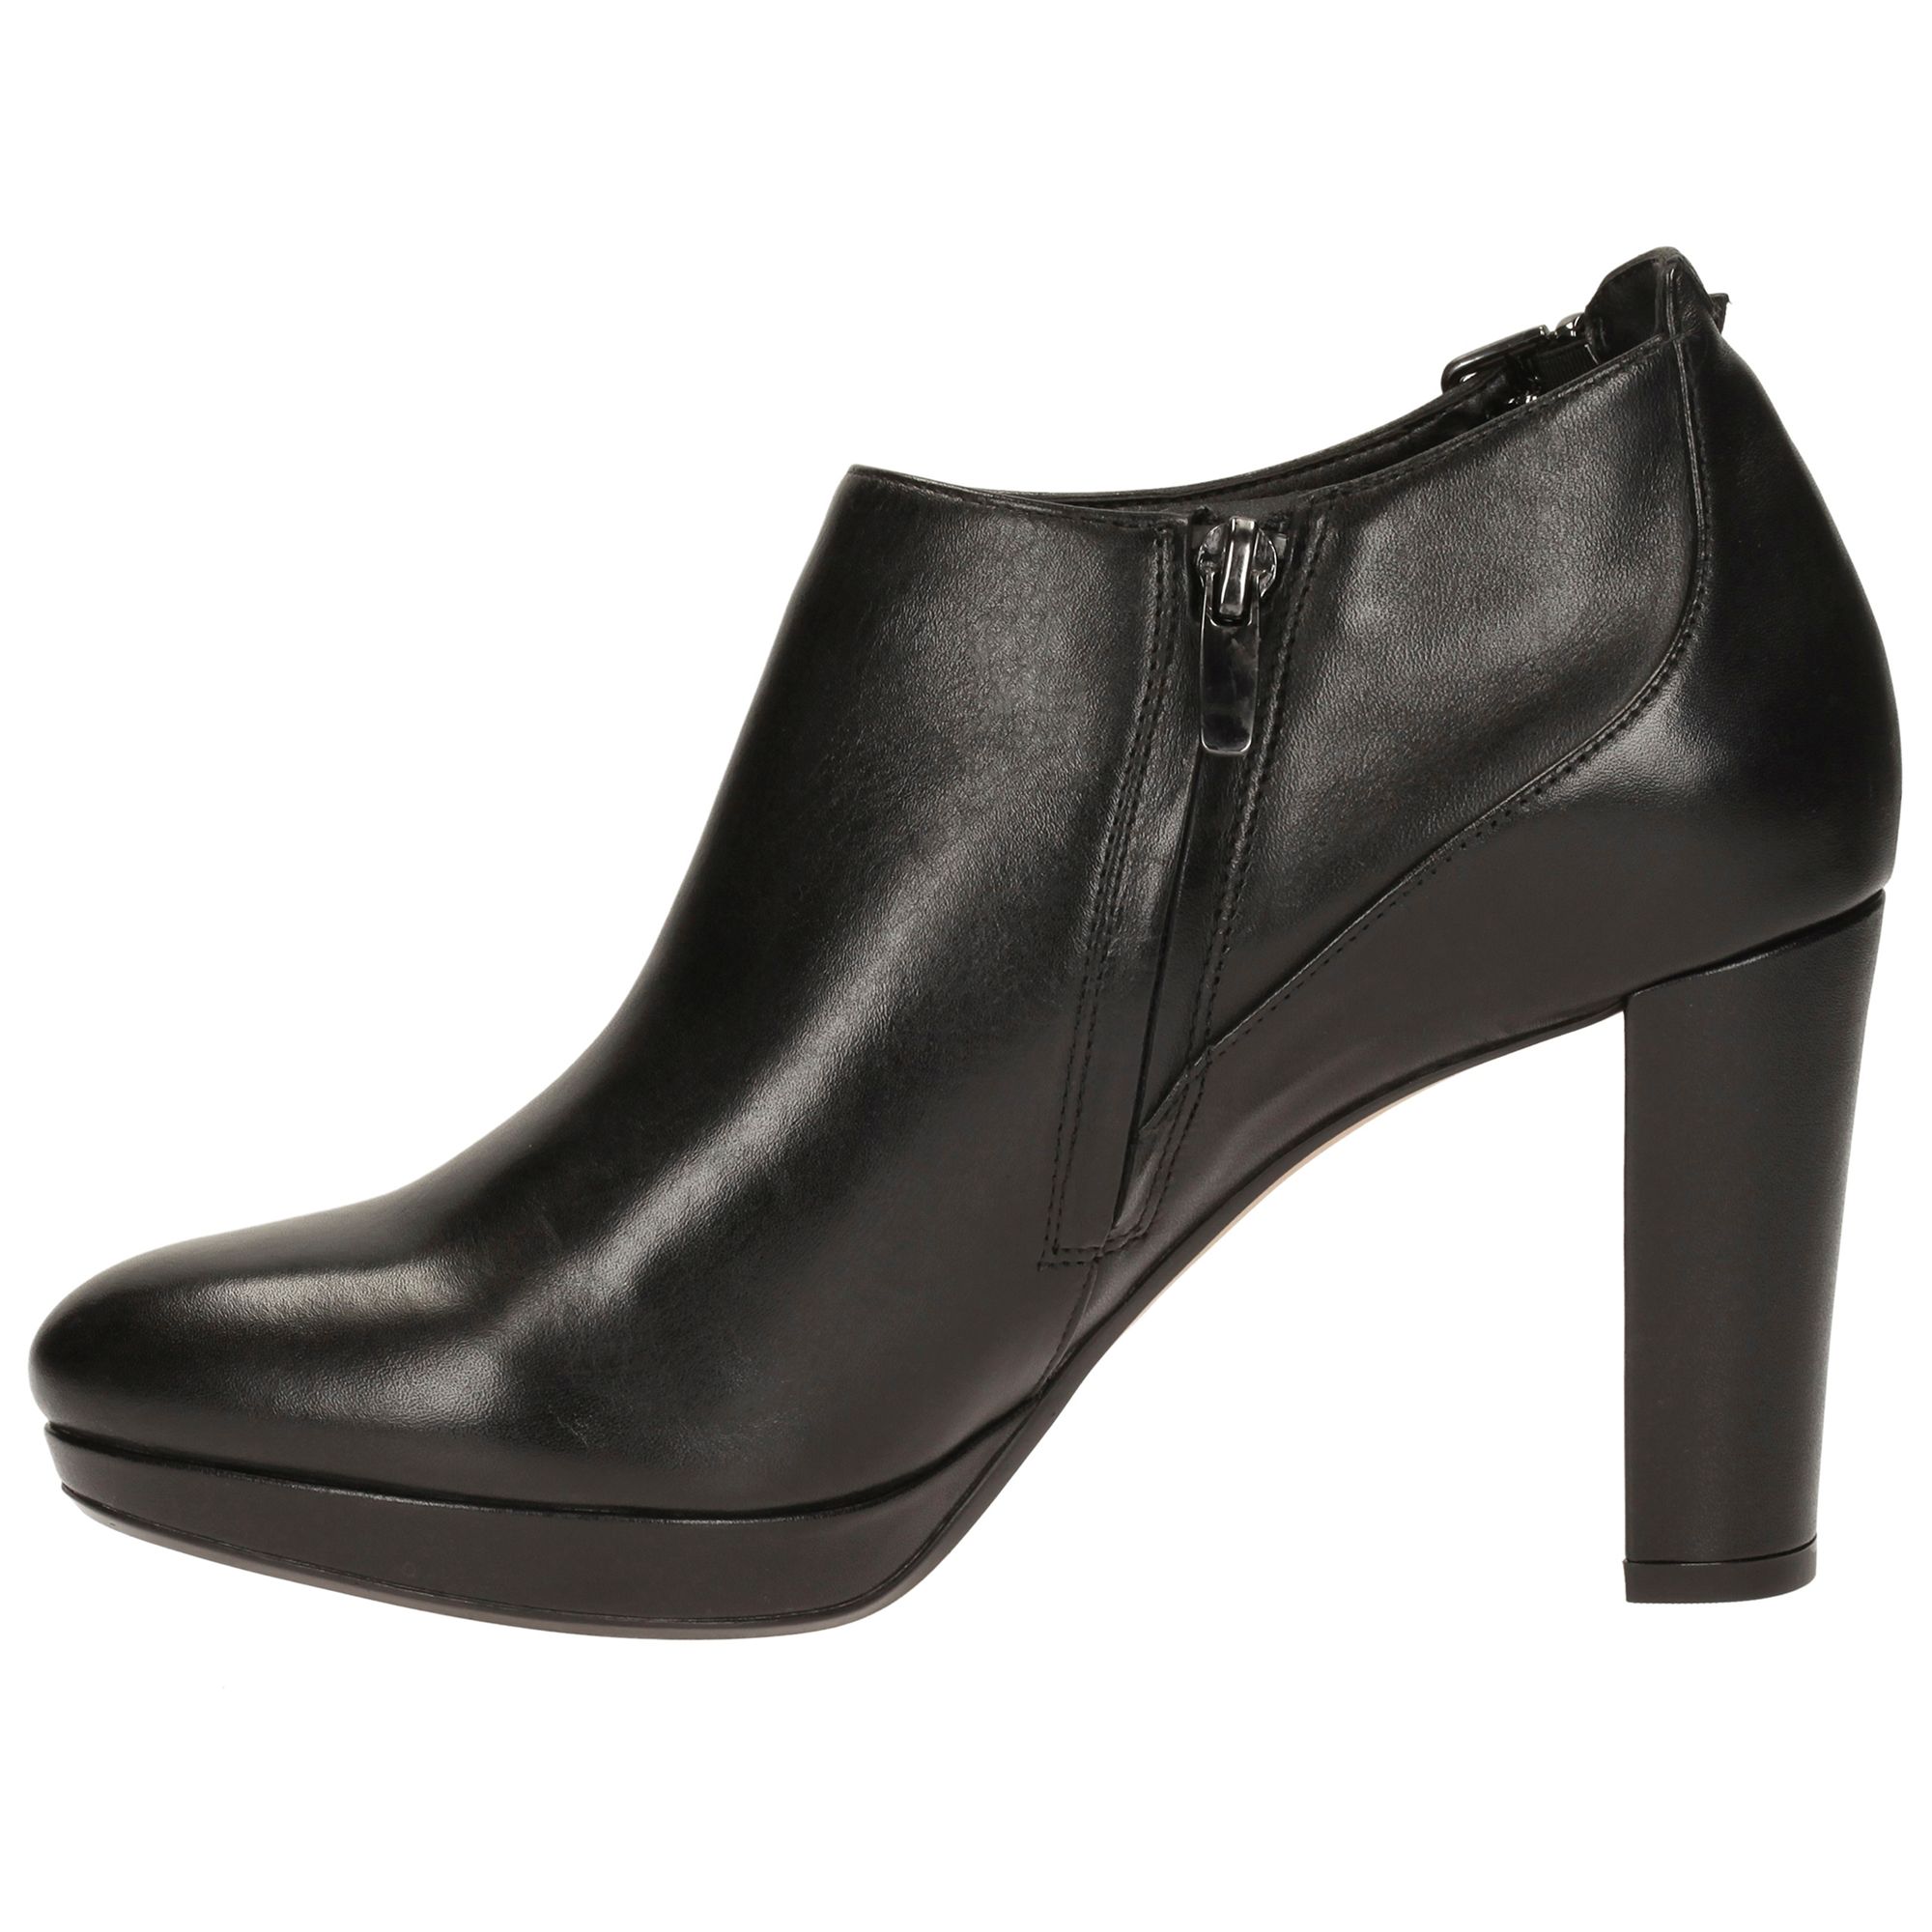 clarks kendra aviva black leather ankle boot with heel